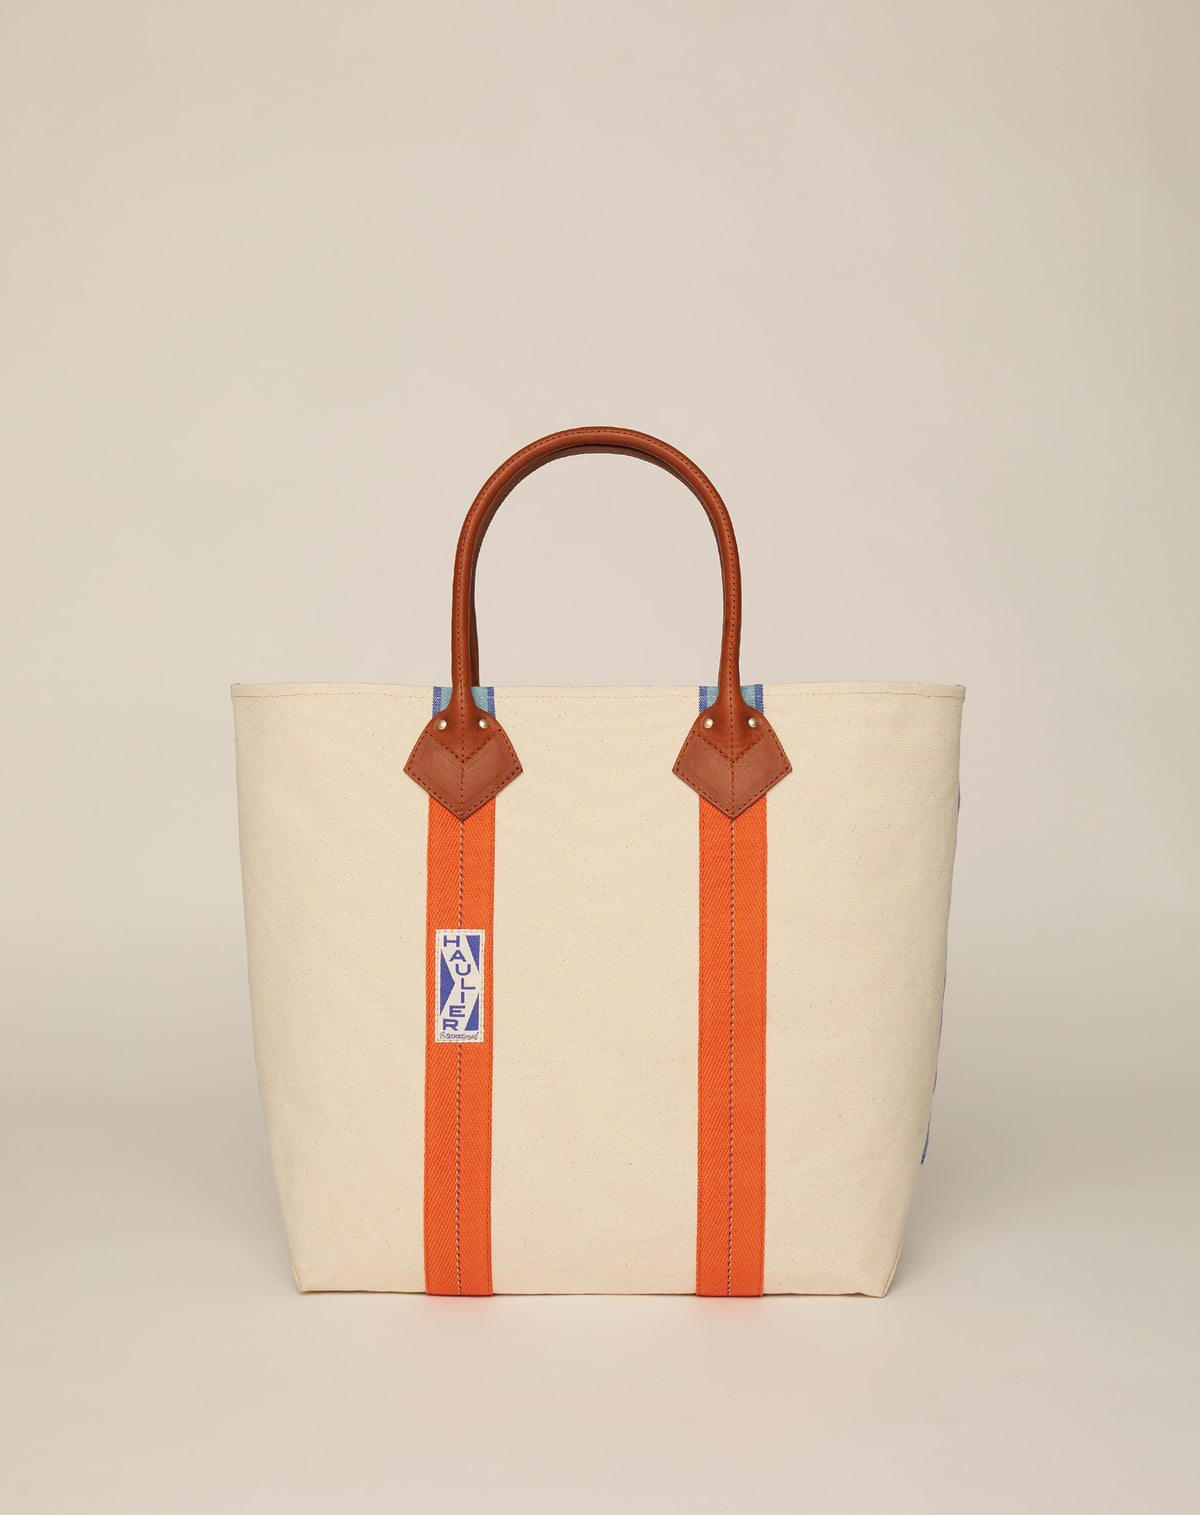 Image of medium-sized classic canvas tote bag in natural ecru colour with tan leather handles and contrasting stripes.